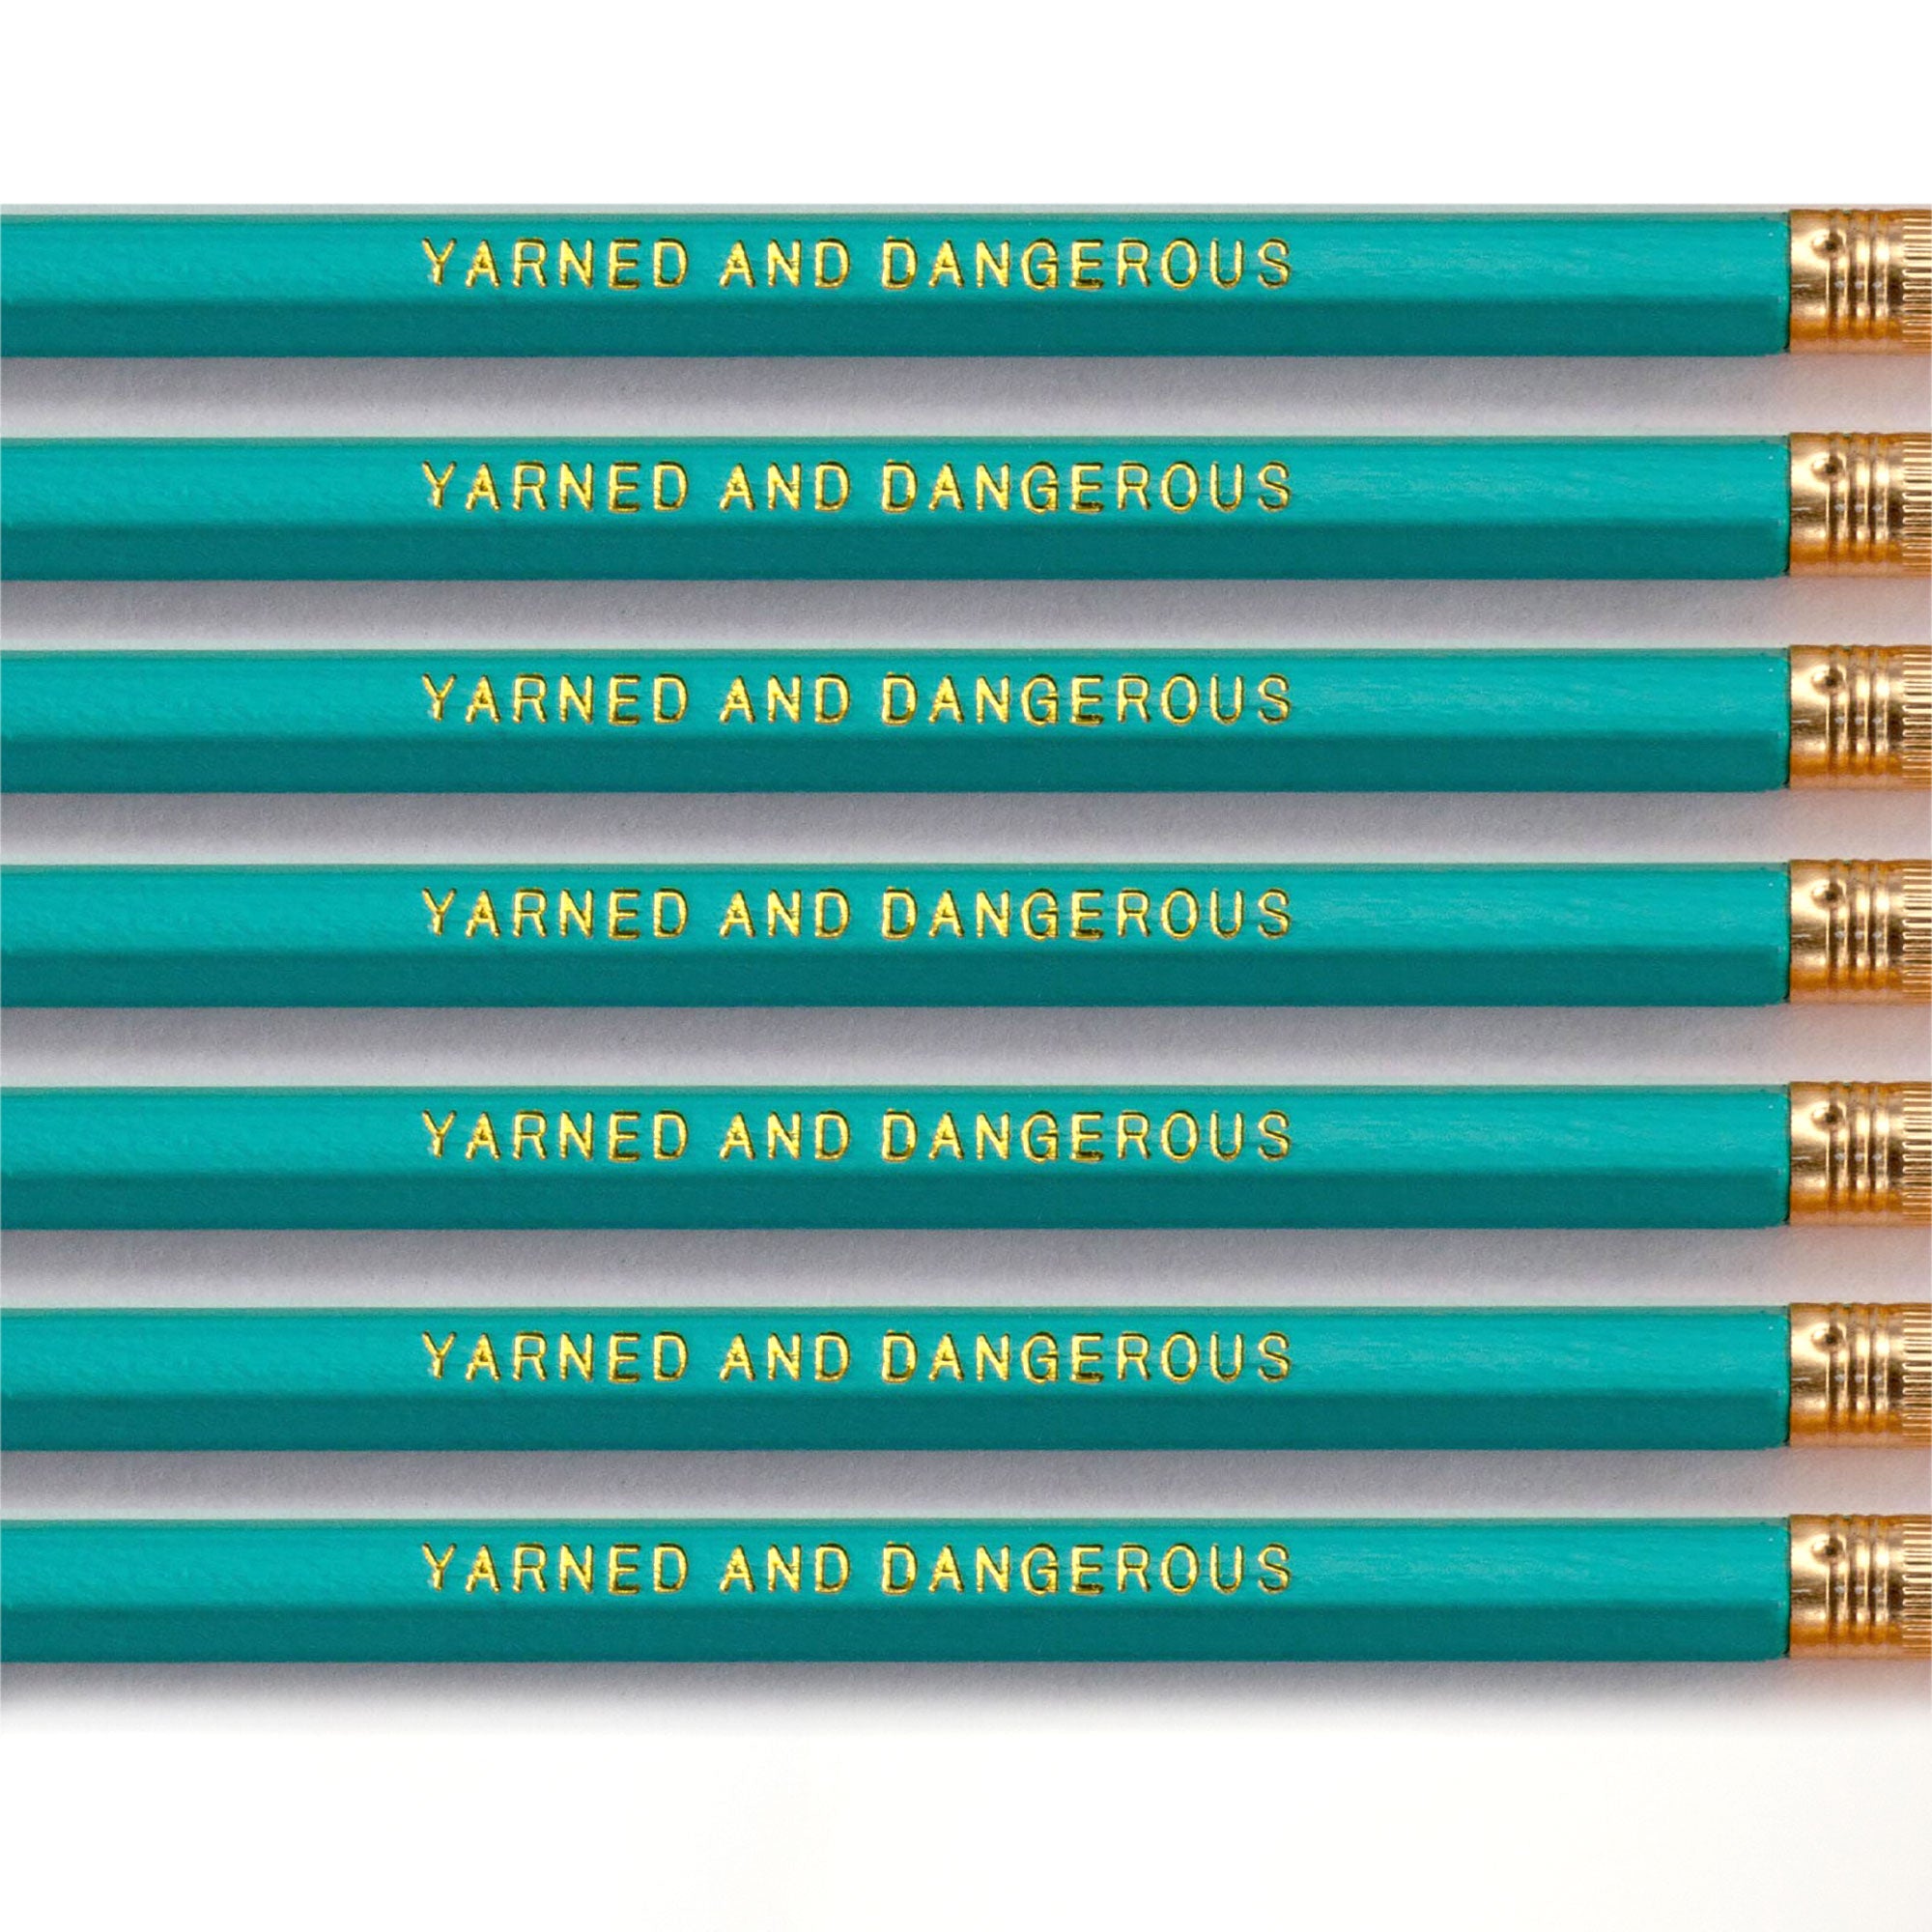 fun pencil set for knitters and crocheters - quality wooden pencils embossed with gold lettering - made in America